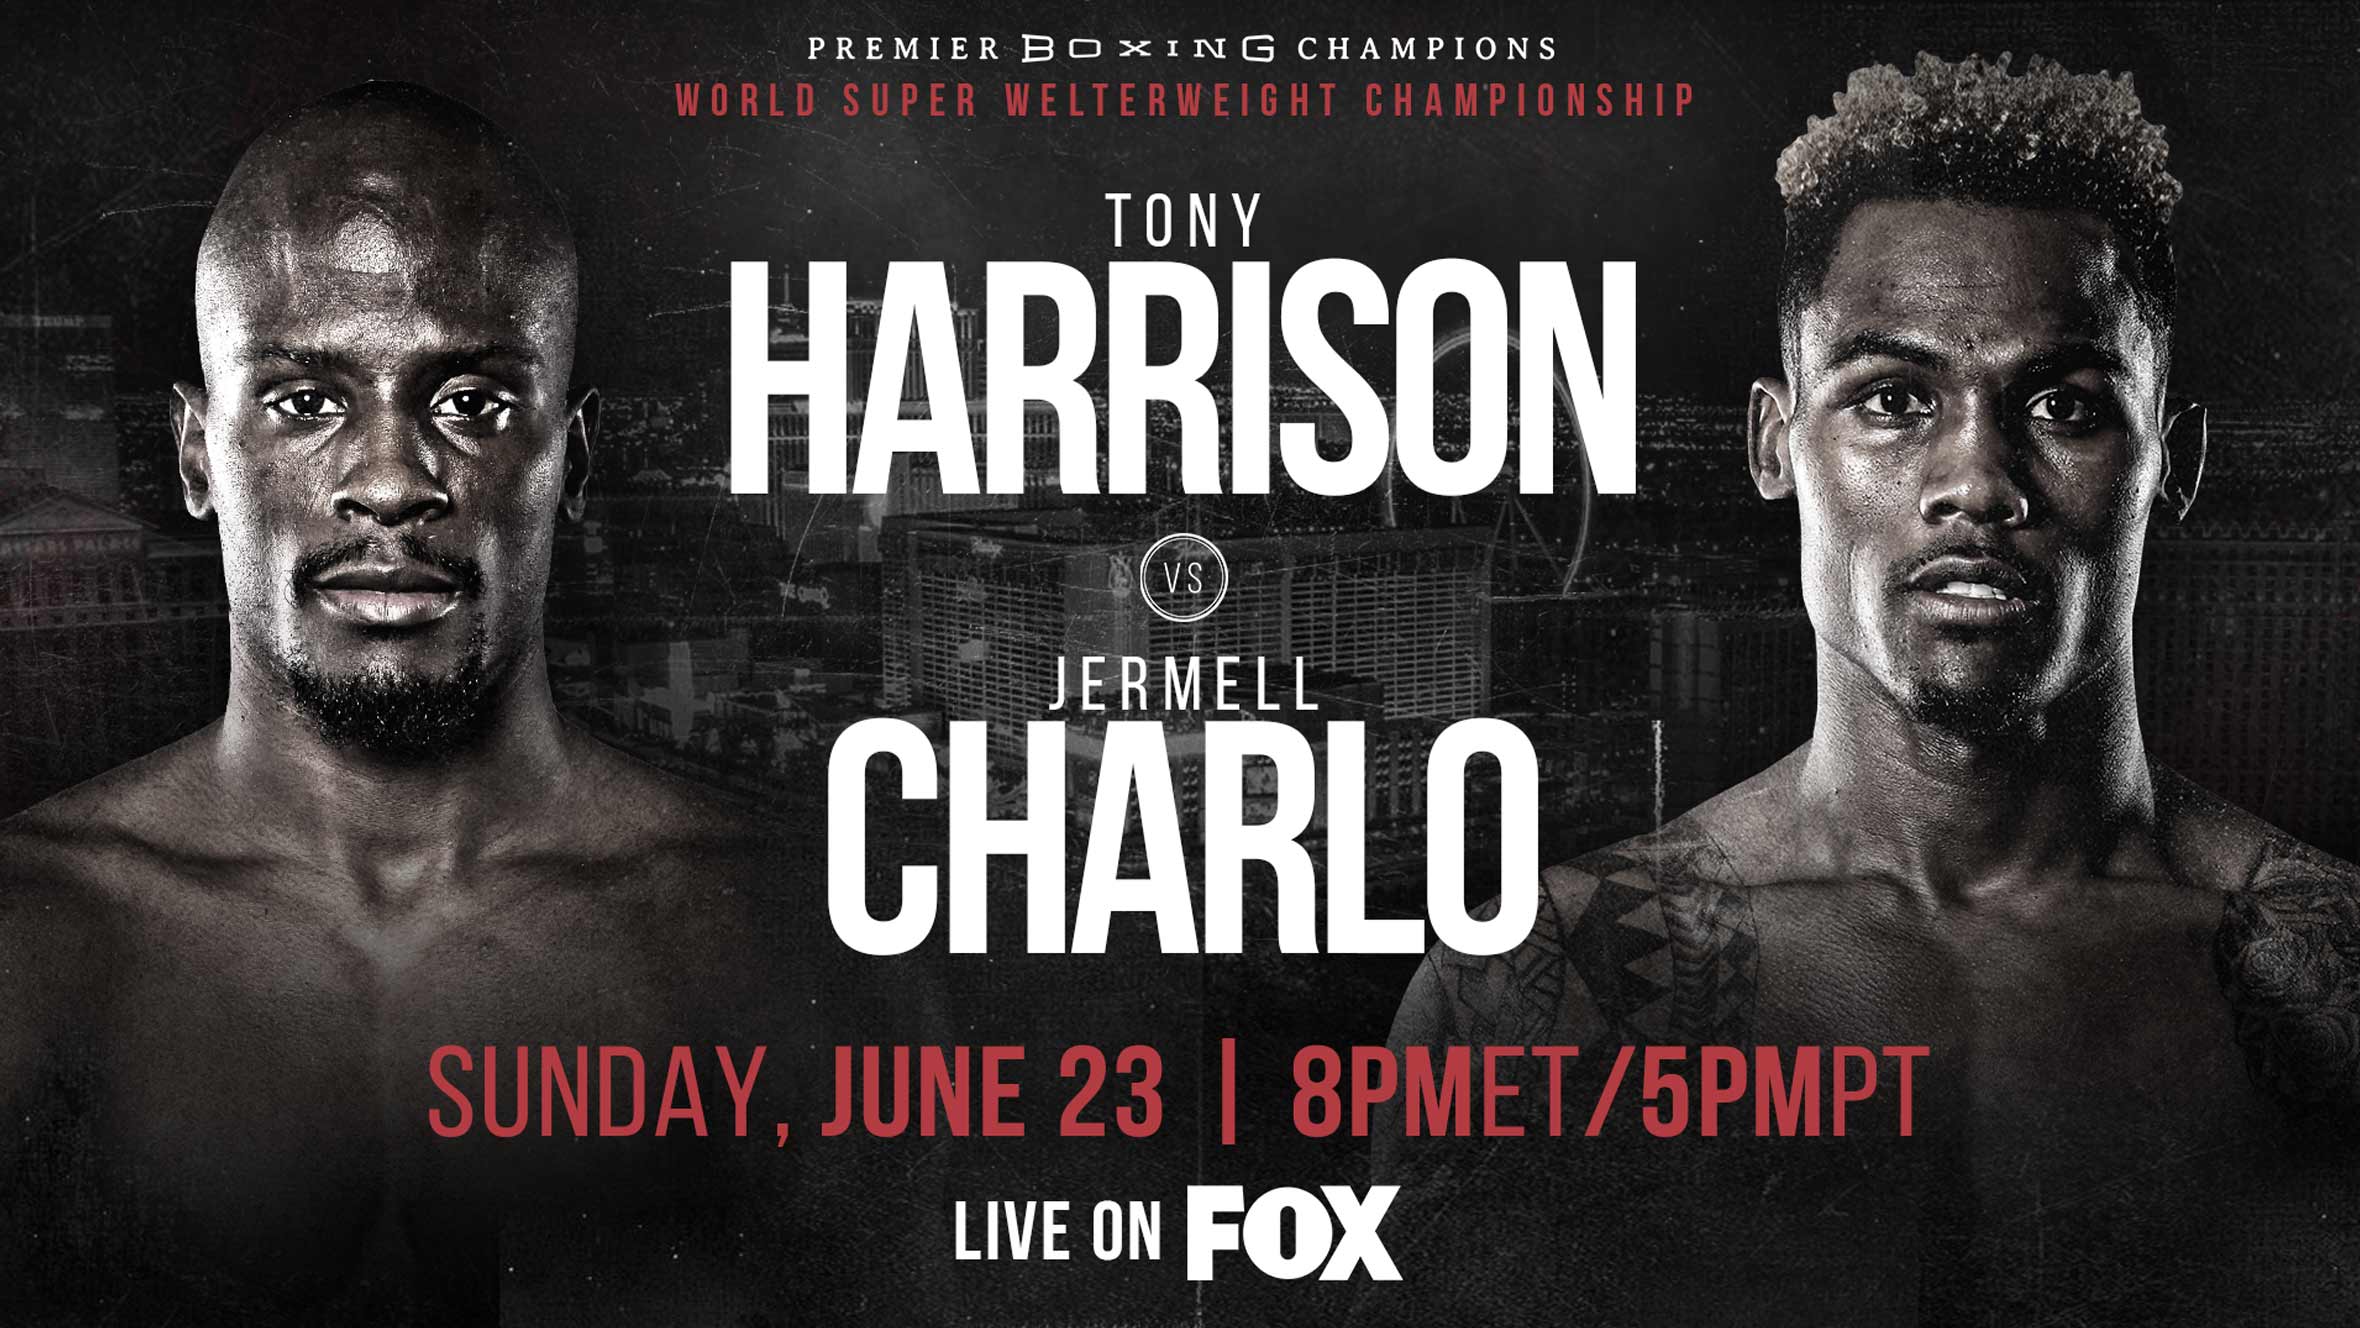 Saul 'Canelo' Alvarez back in action in September against super-welterweight  champion Jermell Charlo